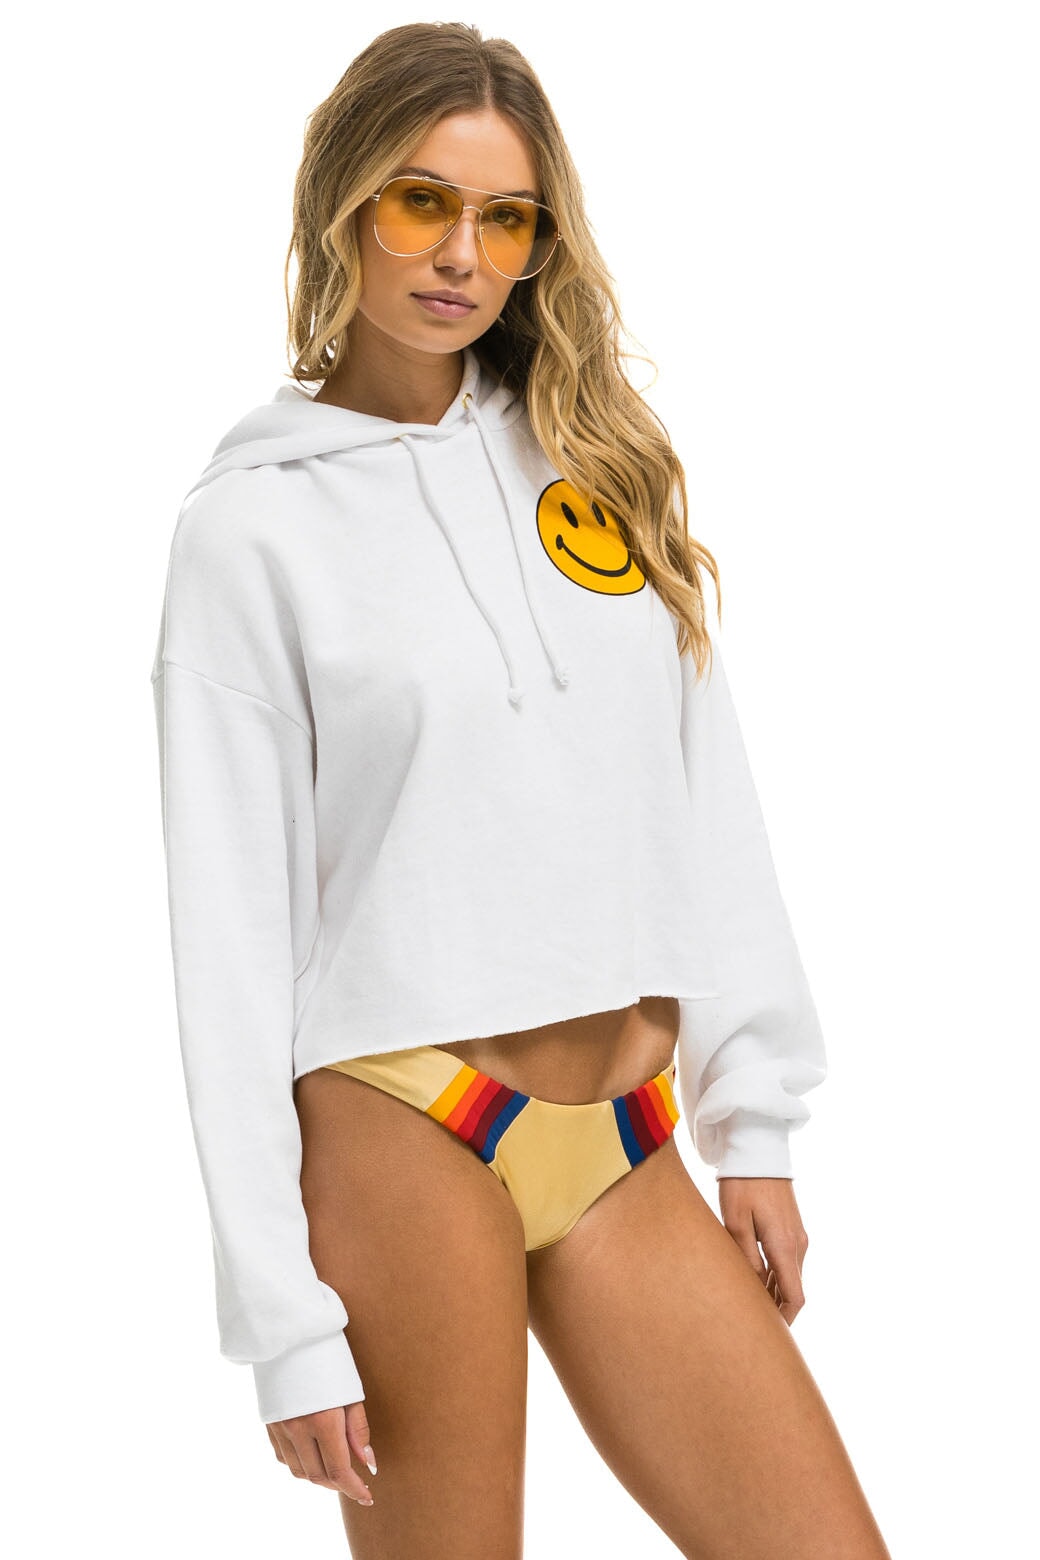 SMILEY 2 RELAXED CROPPED PULLOVER HOODIE - WHITE Aviator Nation 